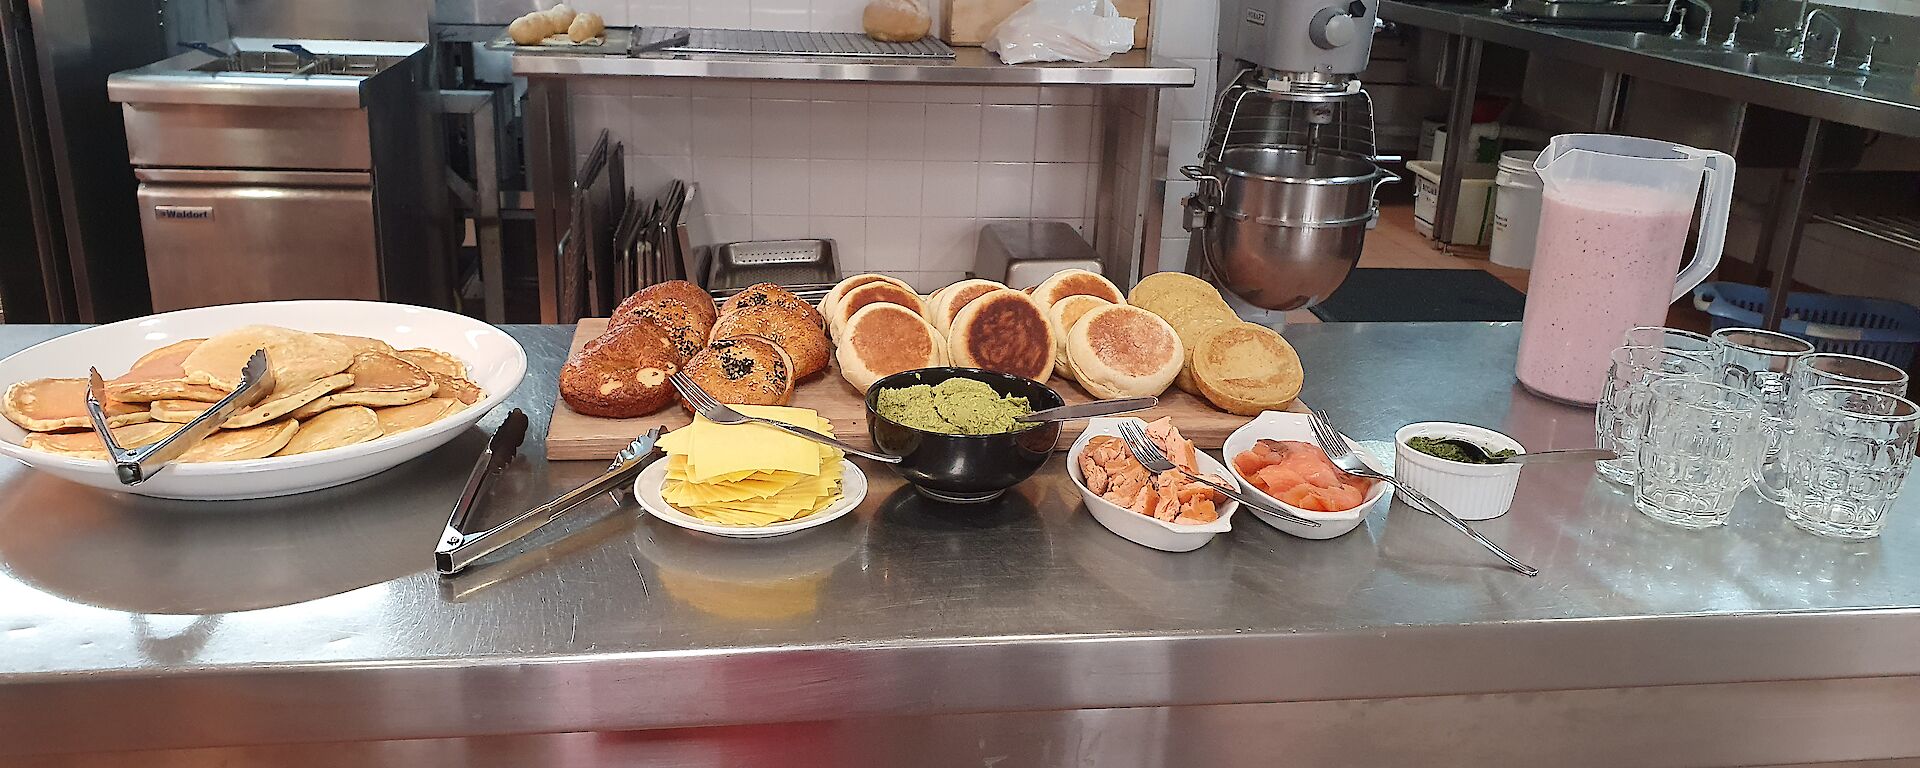 Food laid out on kitchen bench, from left to right, platter of pancakes, wooden chopping board with bagels, english muffins and crumpets with accompaniments in front (cheese, avocado, smoked salmon, herbs), and jug of berry smoothie with glasses